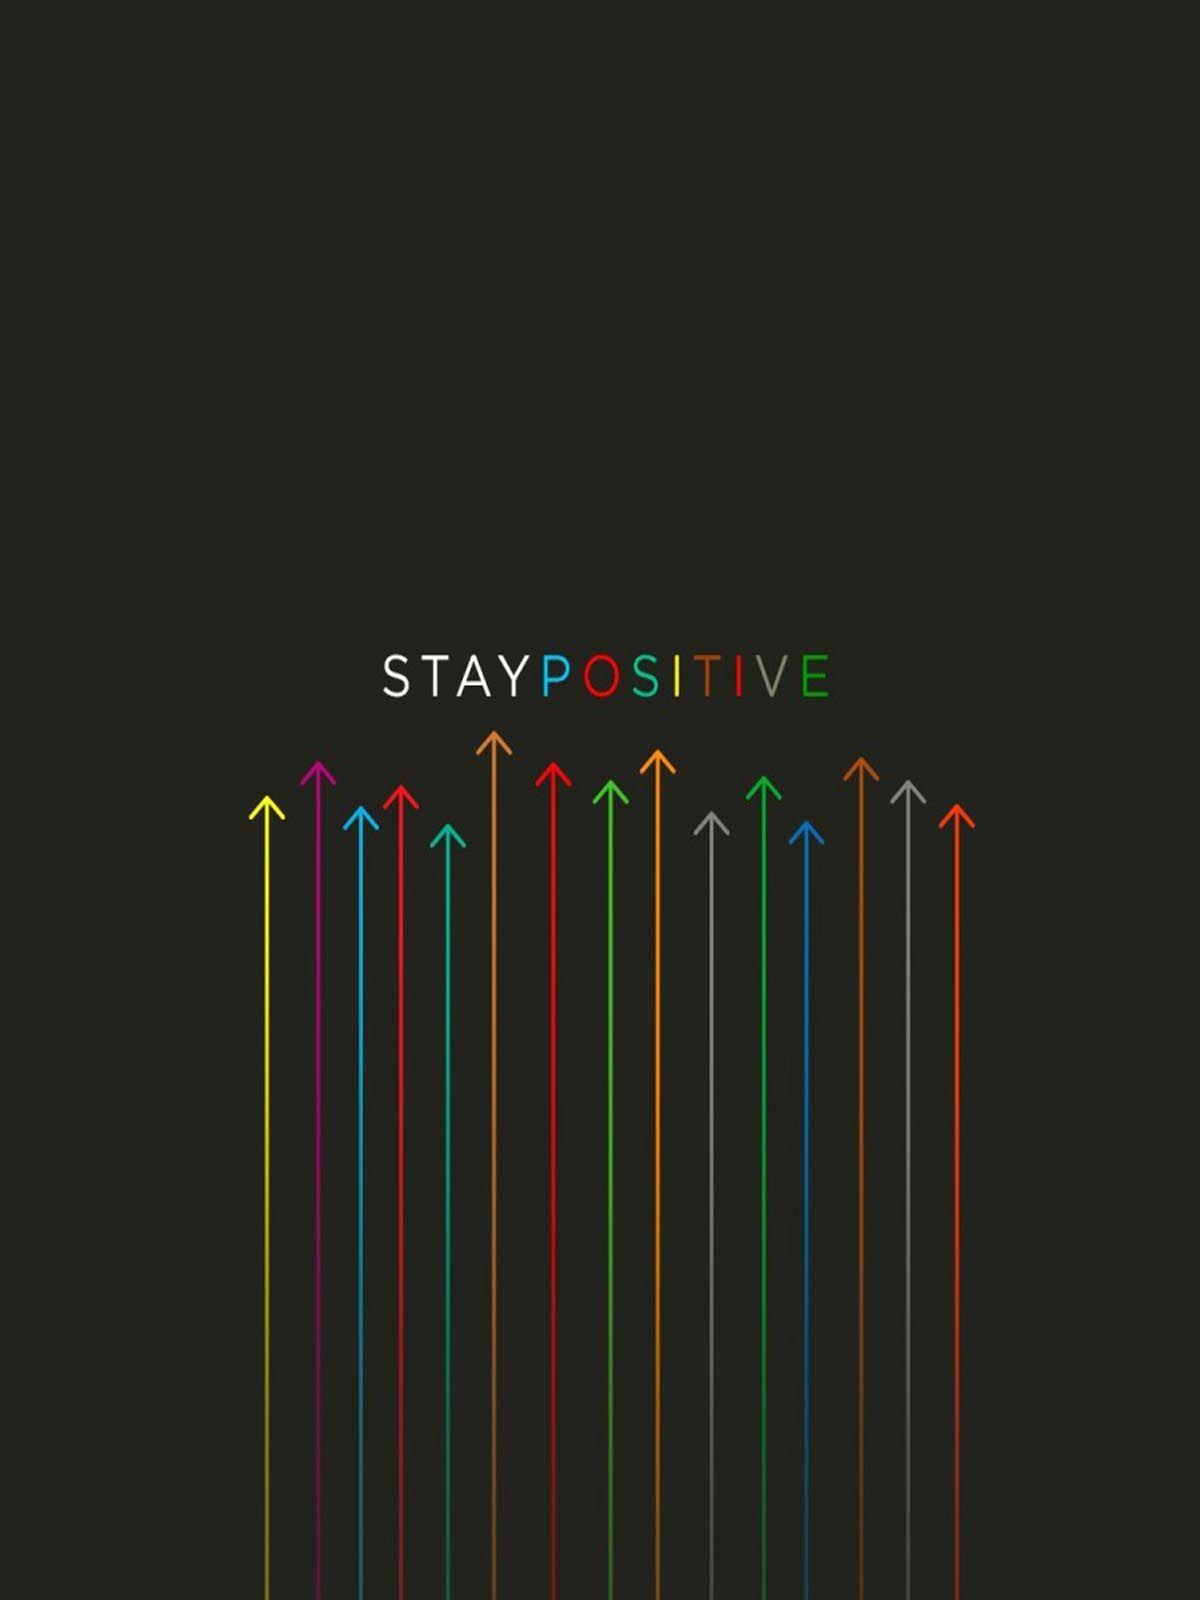 Stay Positive Free 100% Pure HD Quality Mobile Wallpaper